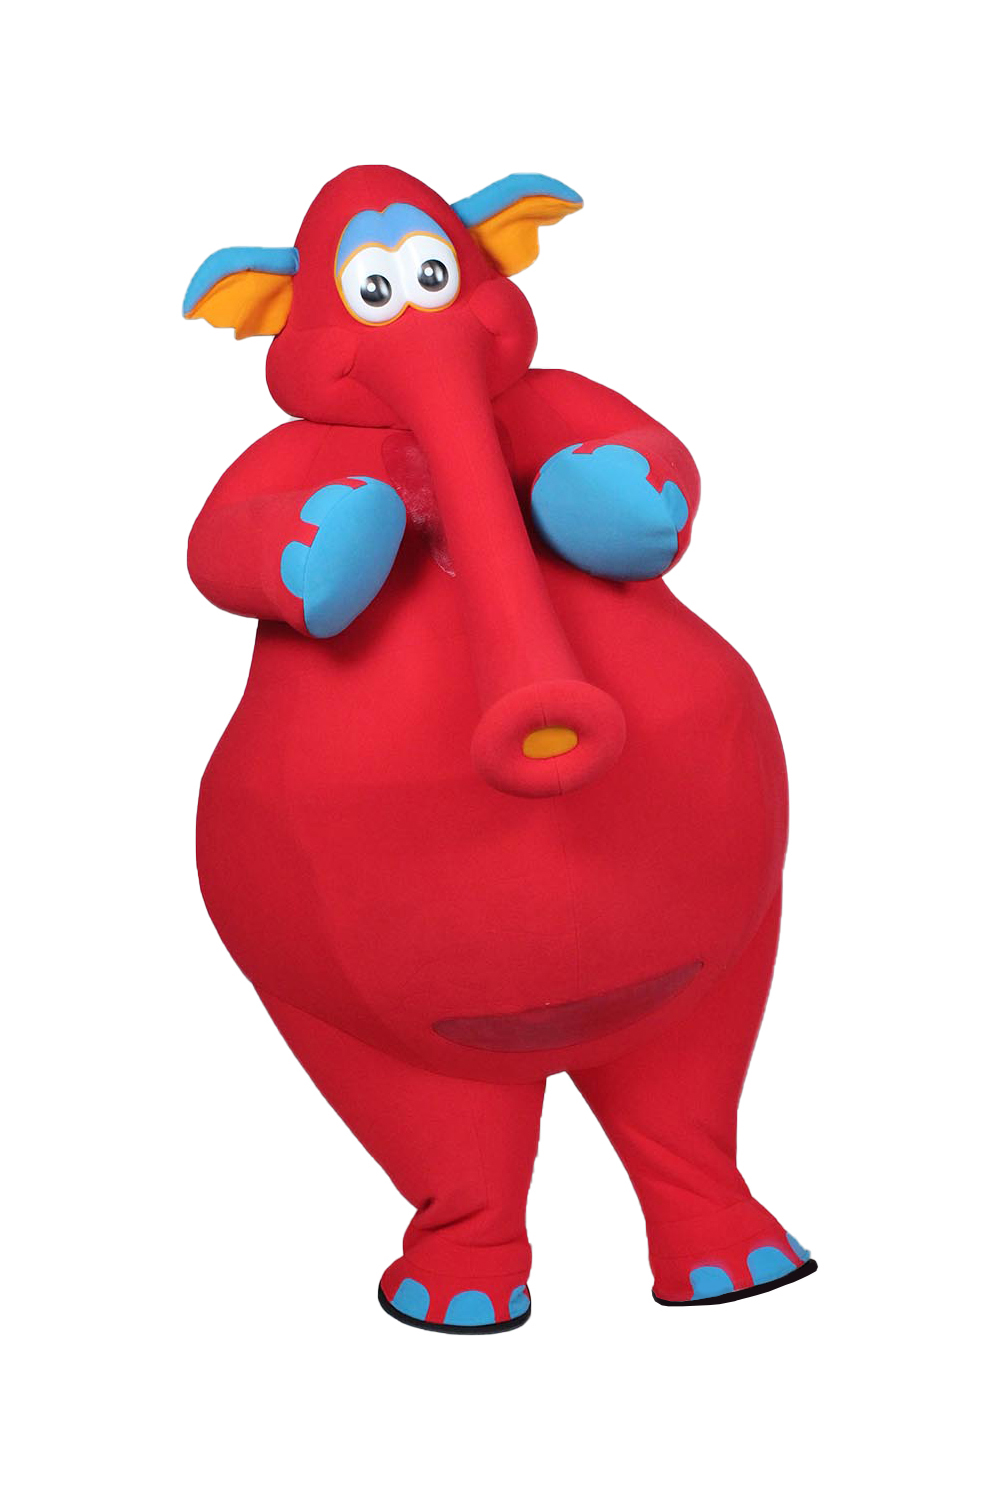 Red Elephant Mascot which is and Inflatable Costume designed and created by Costume Specialists